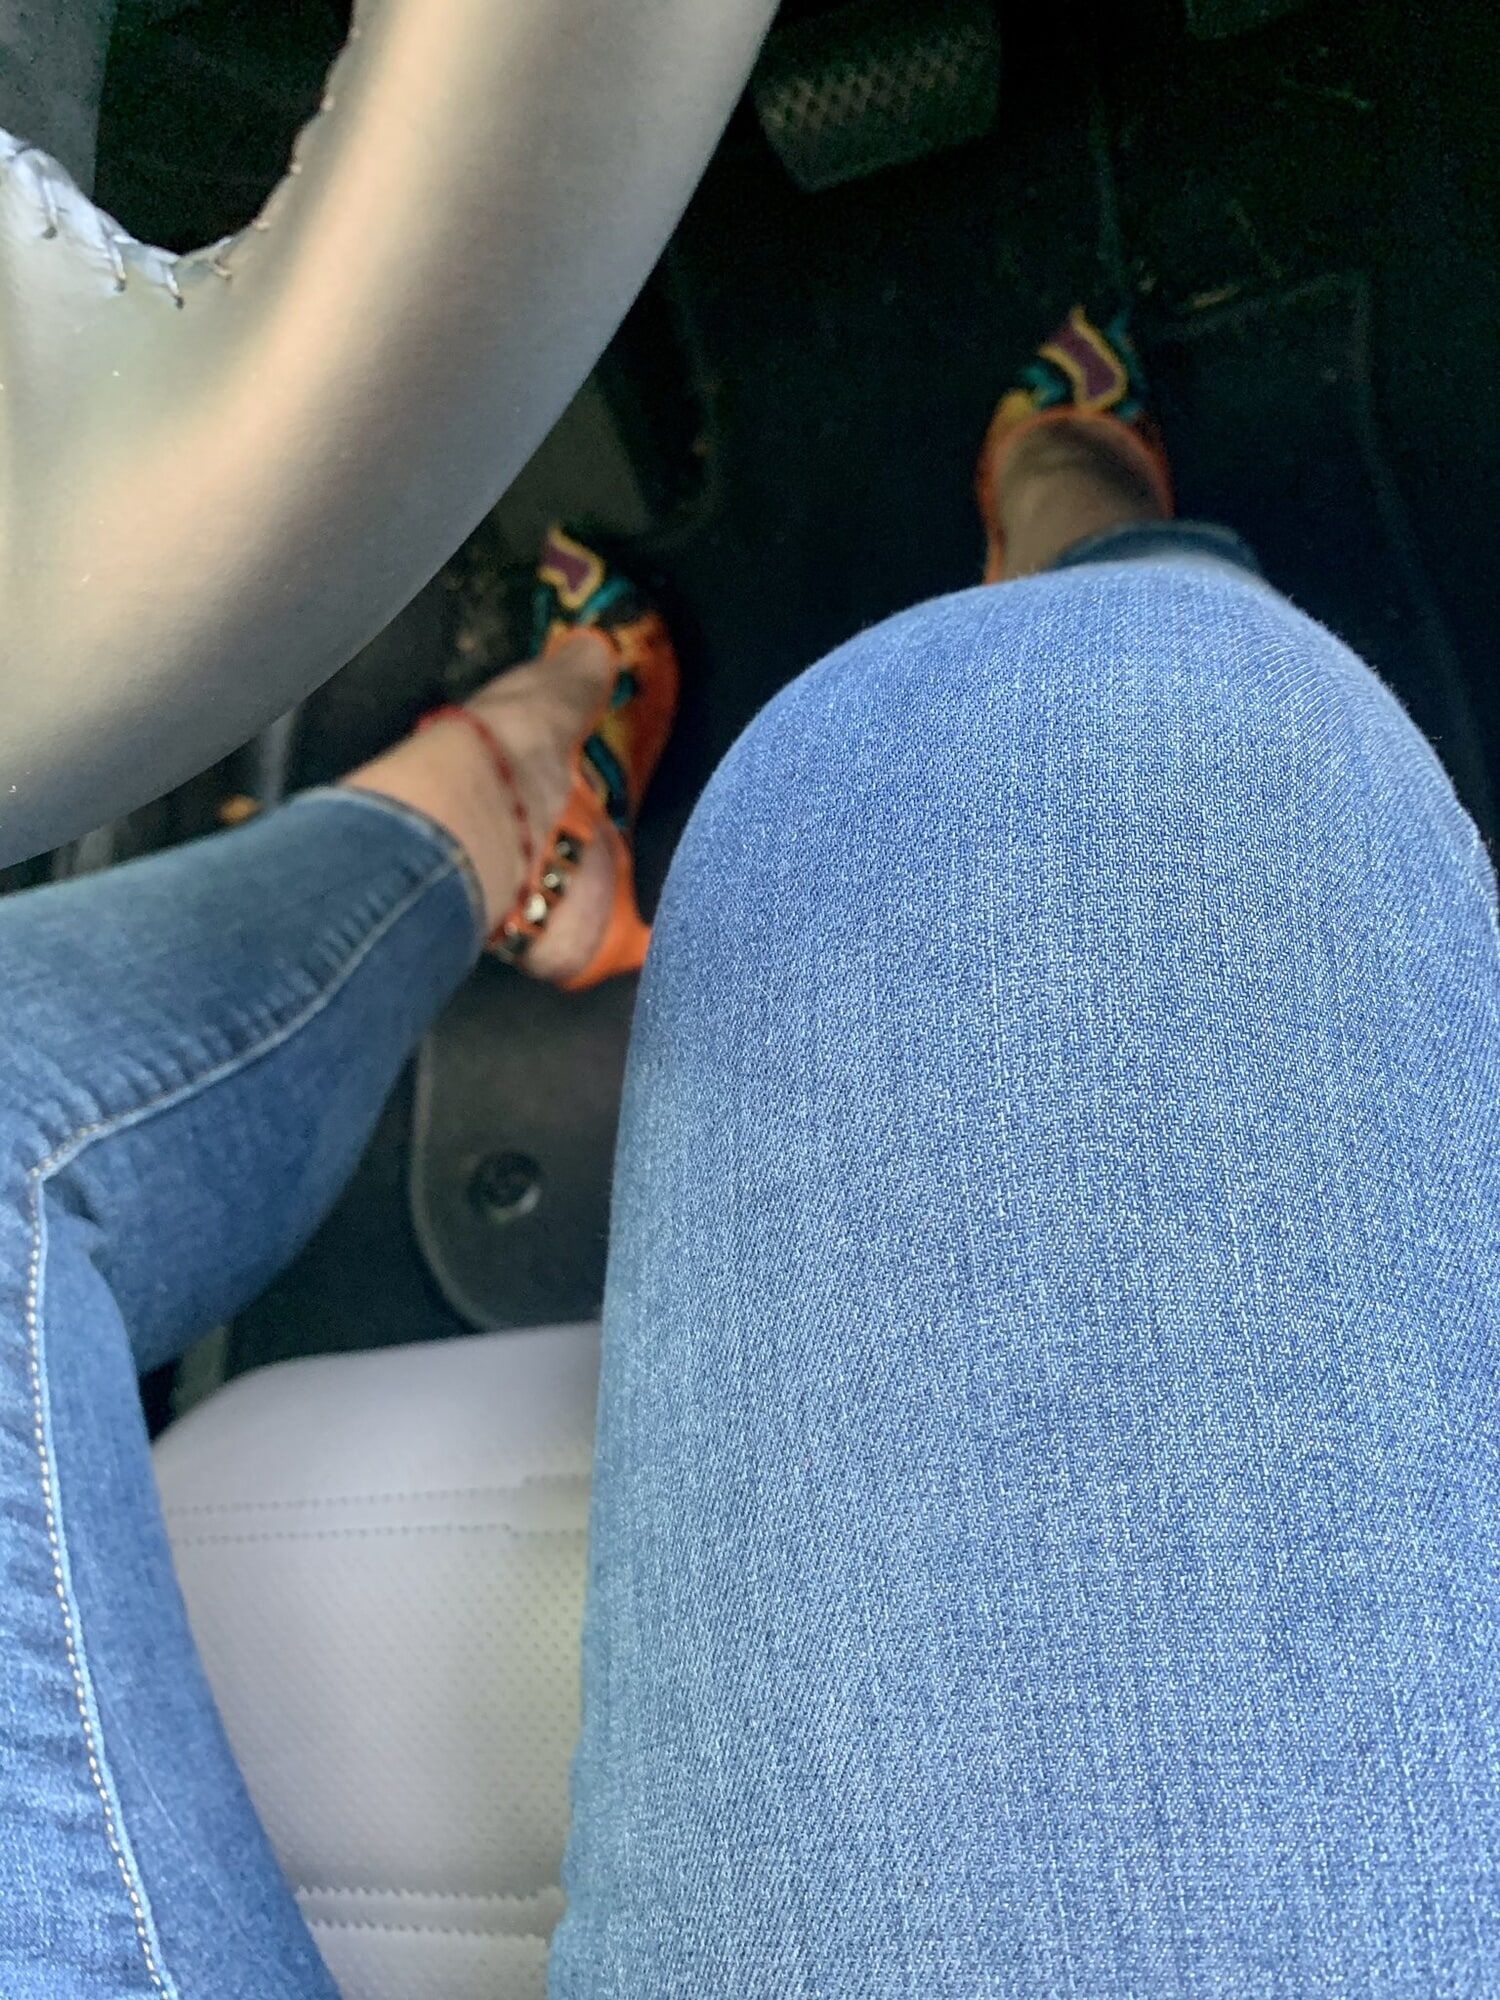 Hot sexy legs wife in high heels and jeans selfie in car